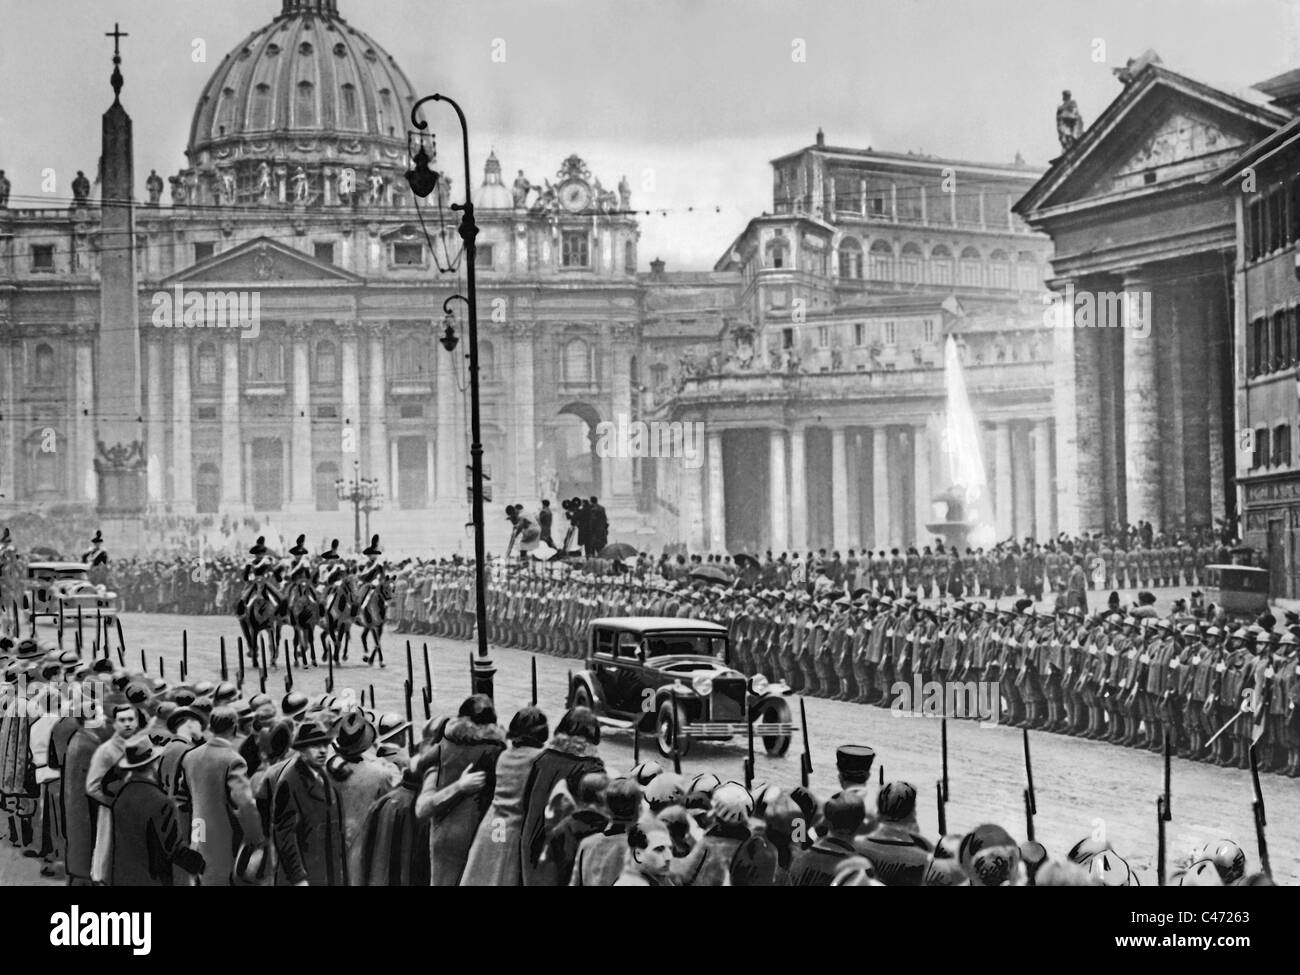 Pope Pius XI receives Benito Mussolini in audience. In the image, the carriages of Mussolini in front of a crowd, 1932 Stock Photo